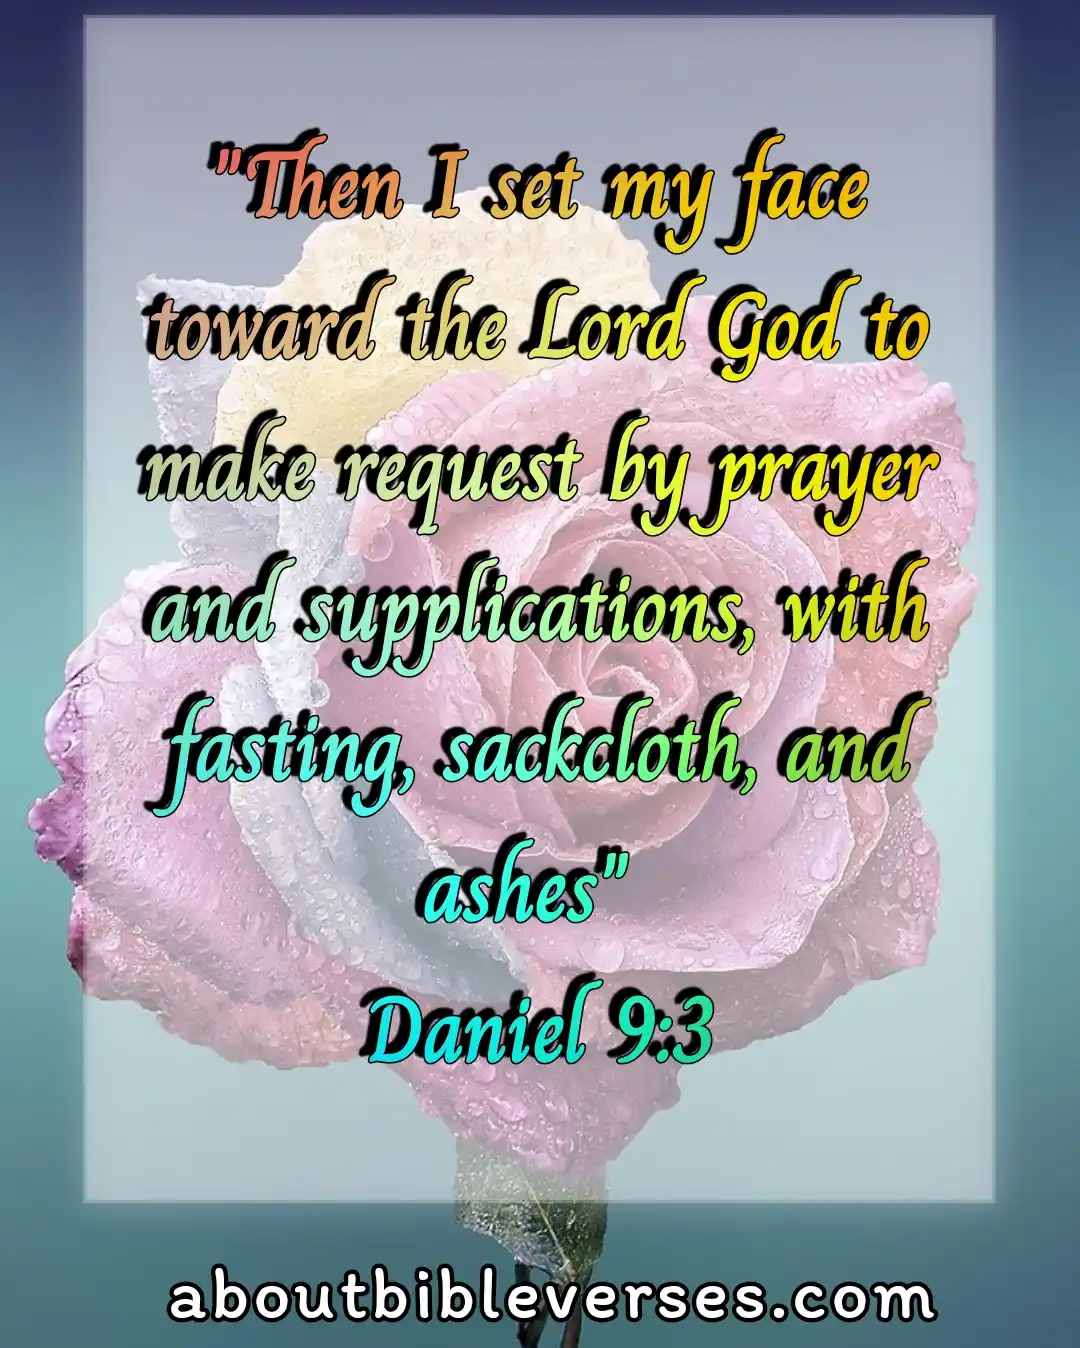 Bible Verses about Fasting (Daniel 9:3)